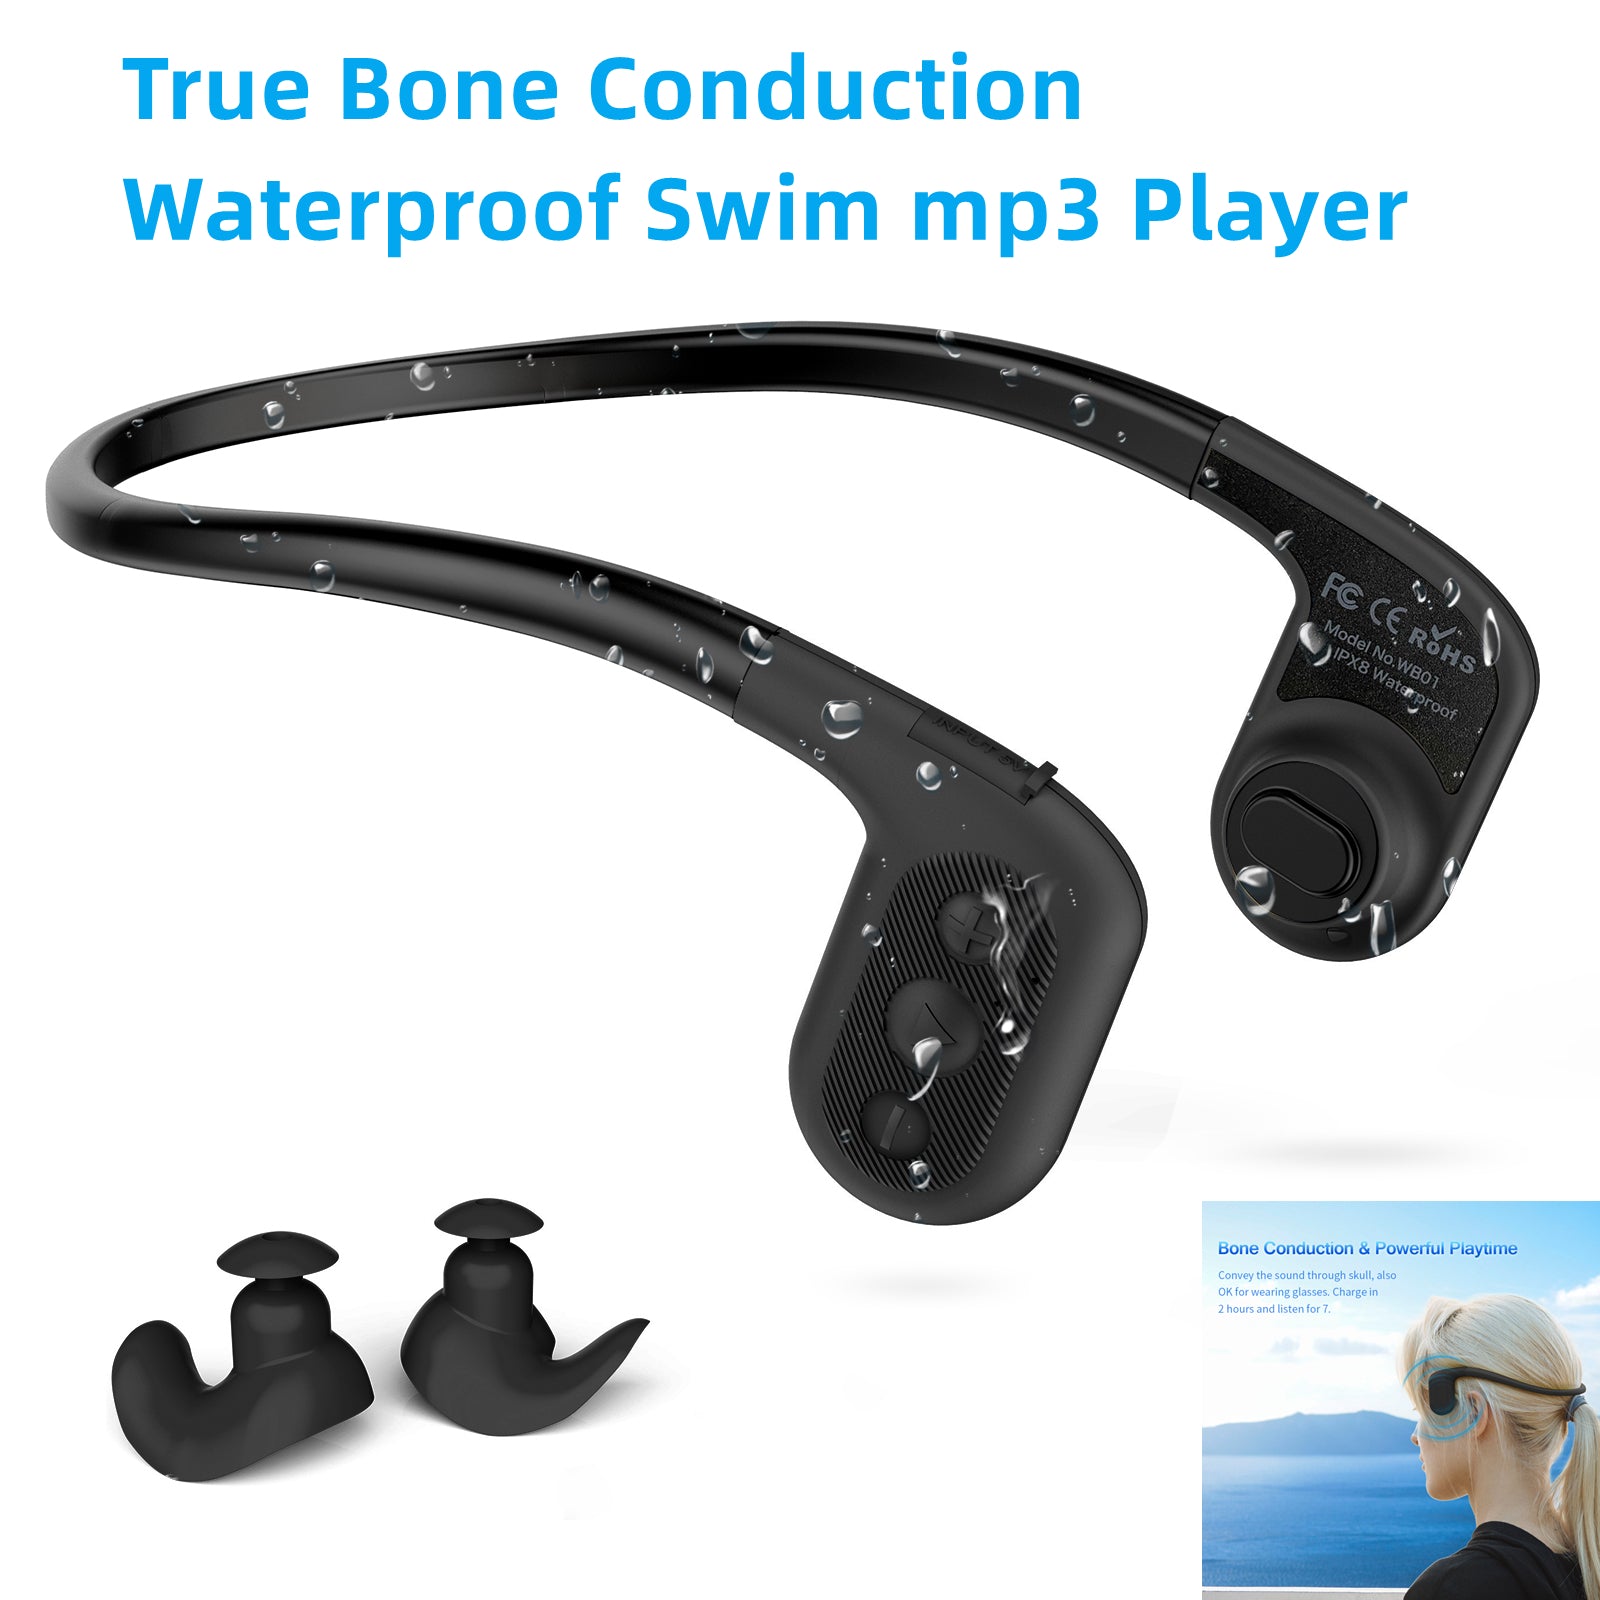 Bone Conduction Headphones Swimming, Tayogo 8GB Bluetooth IPX8 Waterproof  Mp3 Player, Underwater Headsets for Diving, Running, Cycling-Black